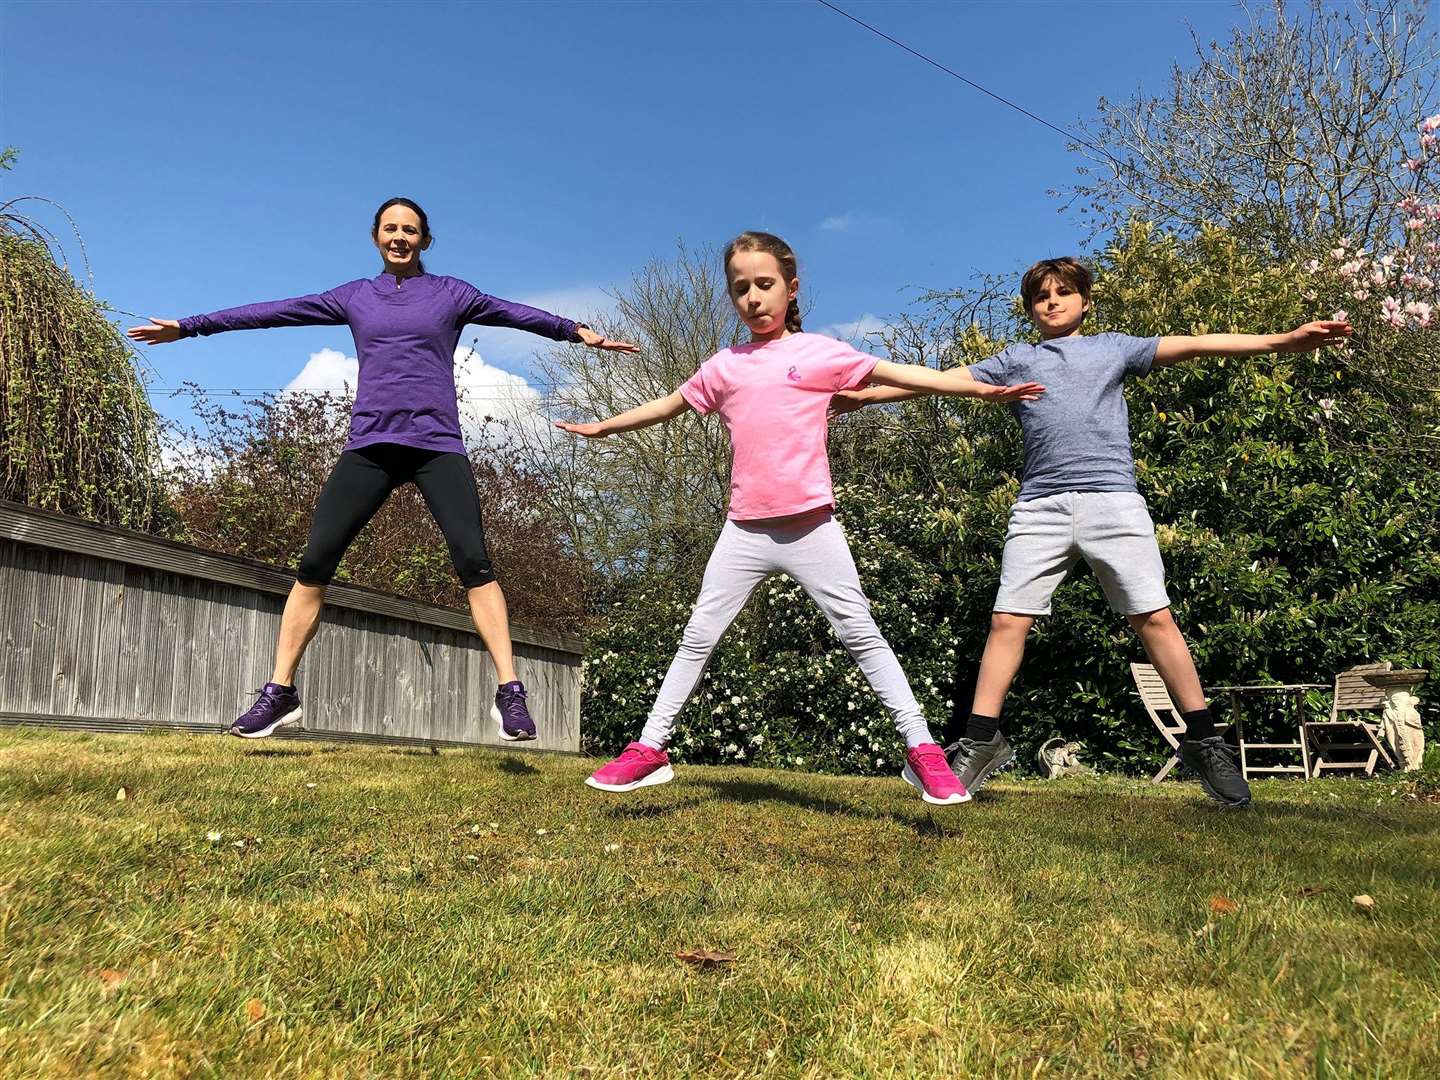 Jacob and Emily join their mum Jo Pavey with some exercises in the garden. Picture: Gavin Pavey/PA